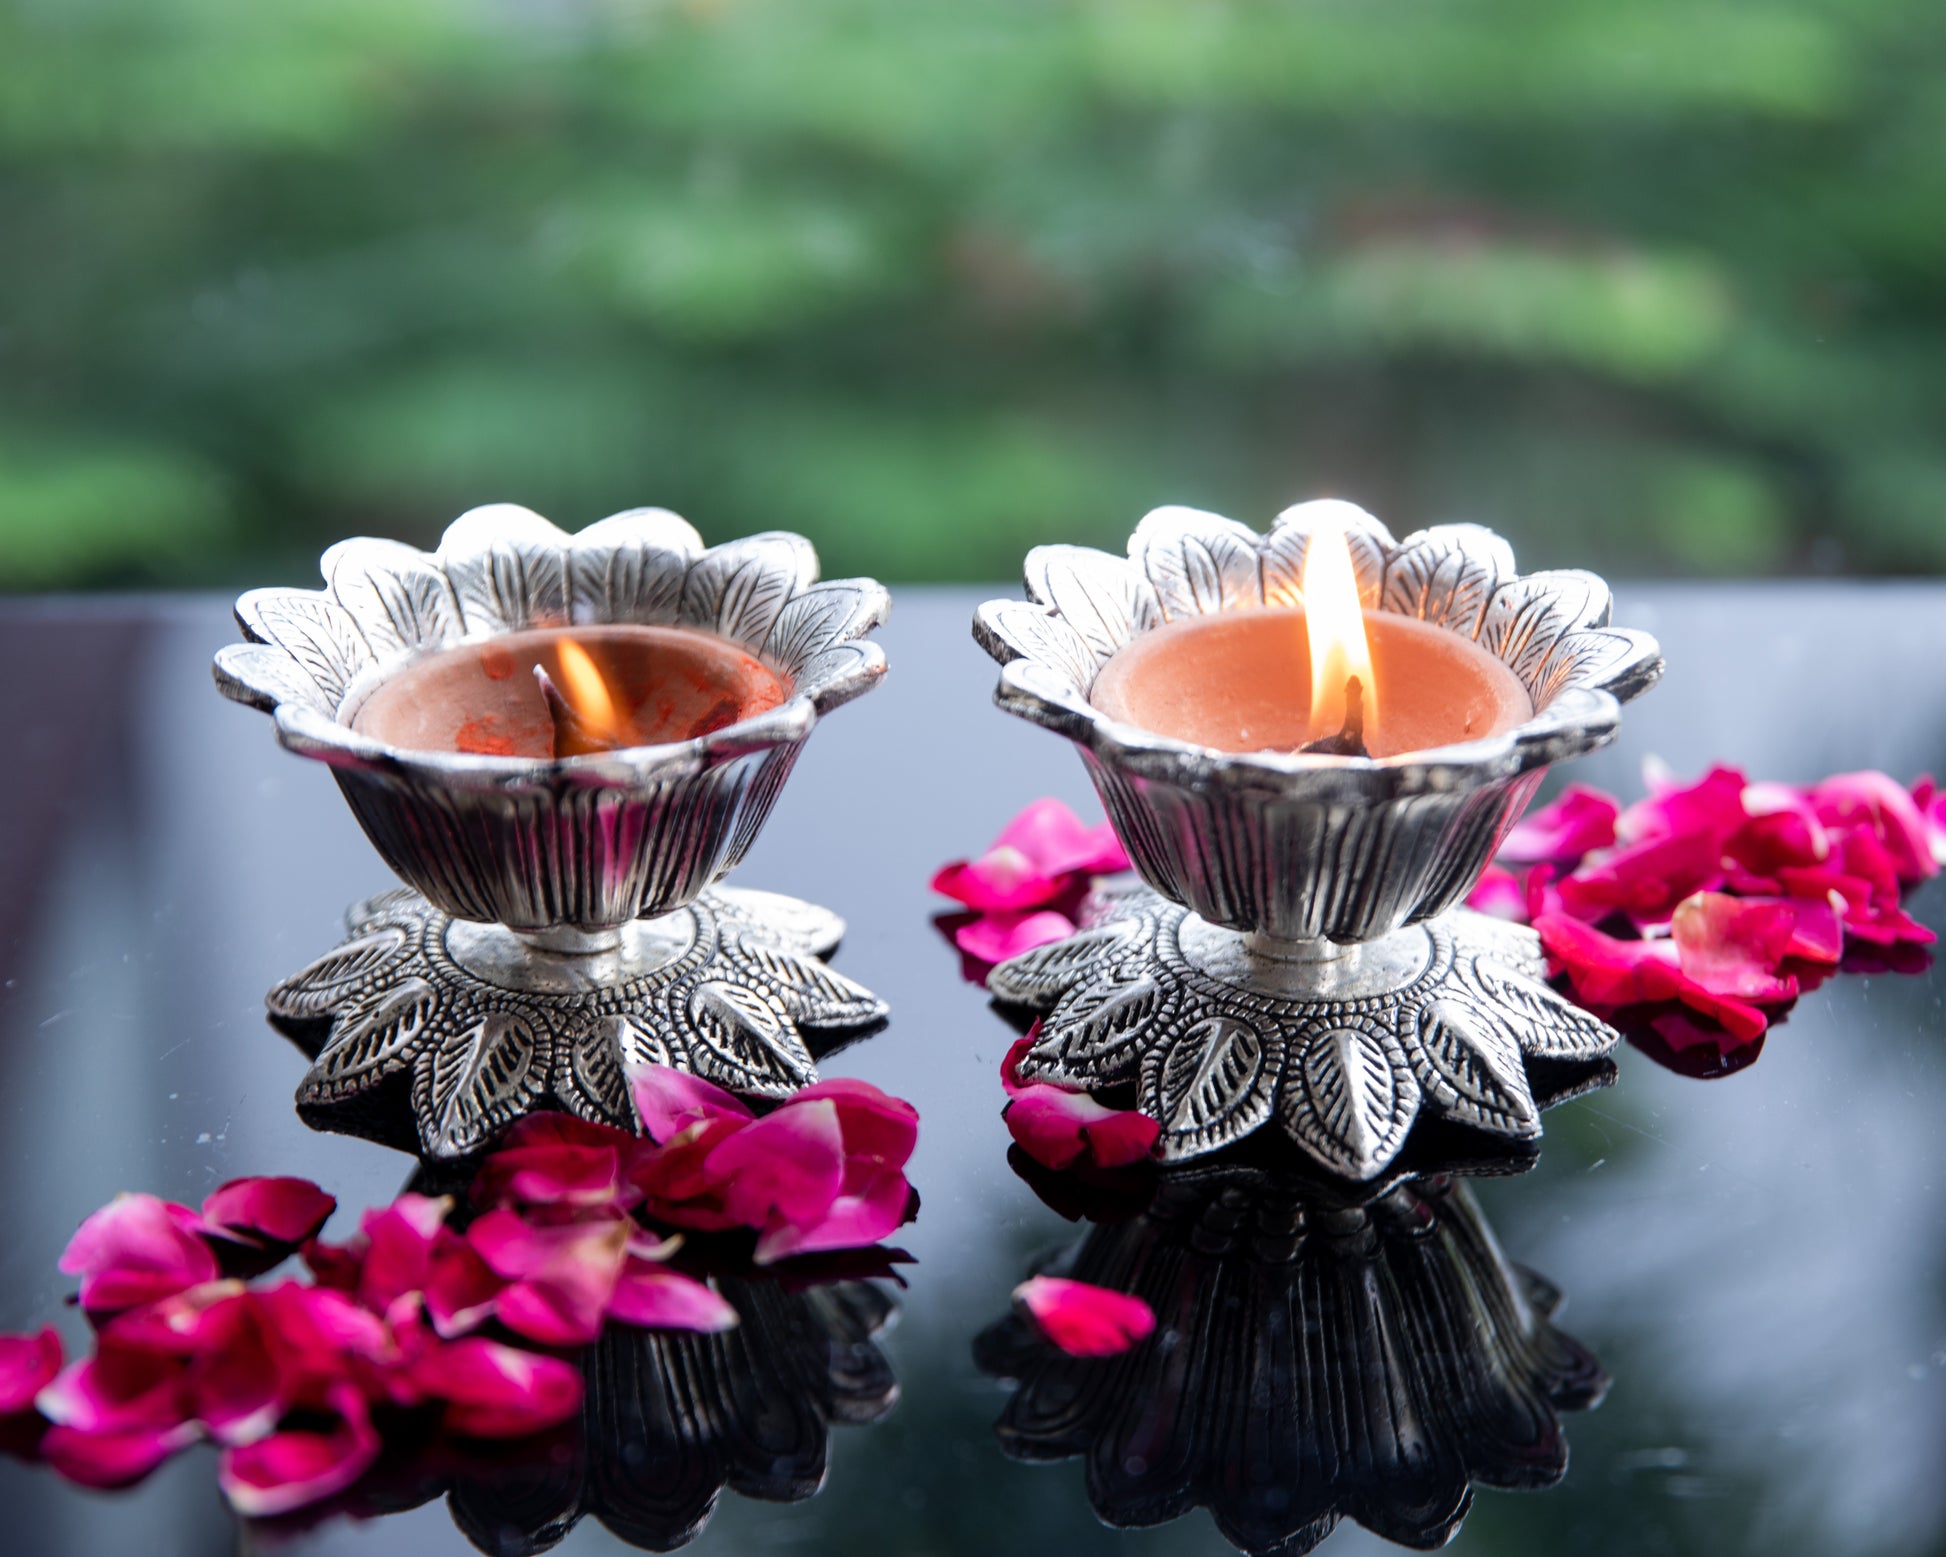 Leela's Lotus Diya is intricately designed diya and Its compact size makes it a versatile addition to your altar or meditation space.    